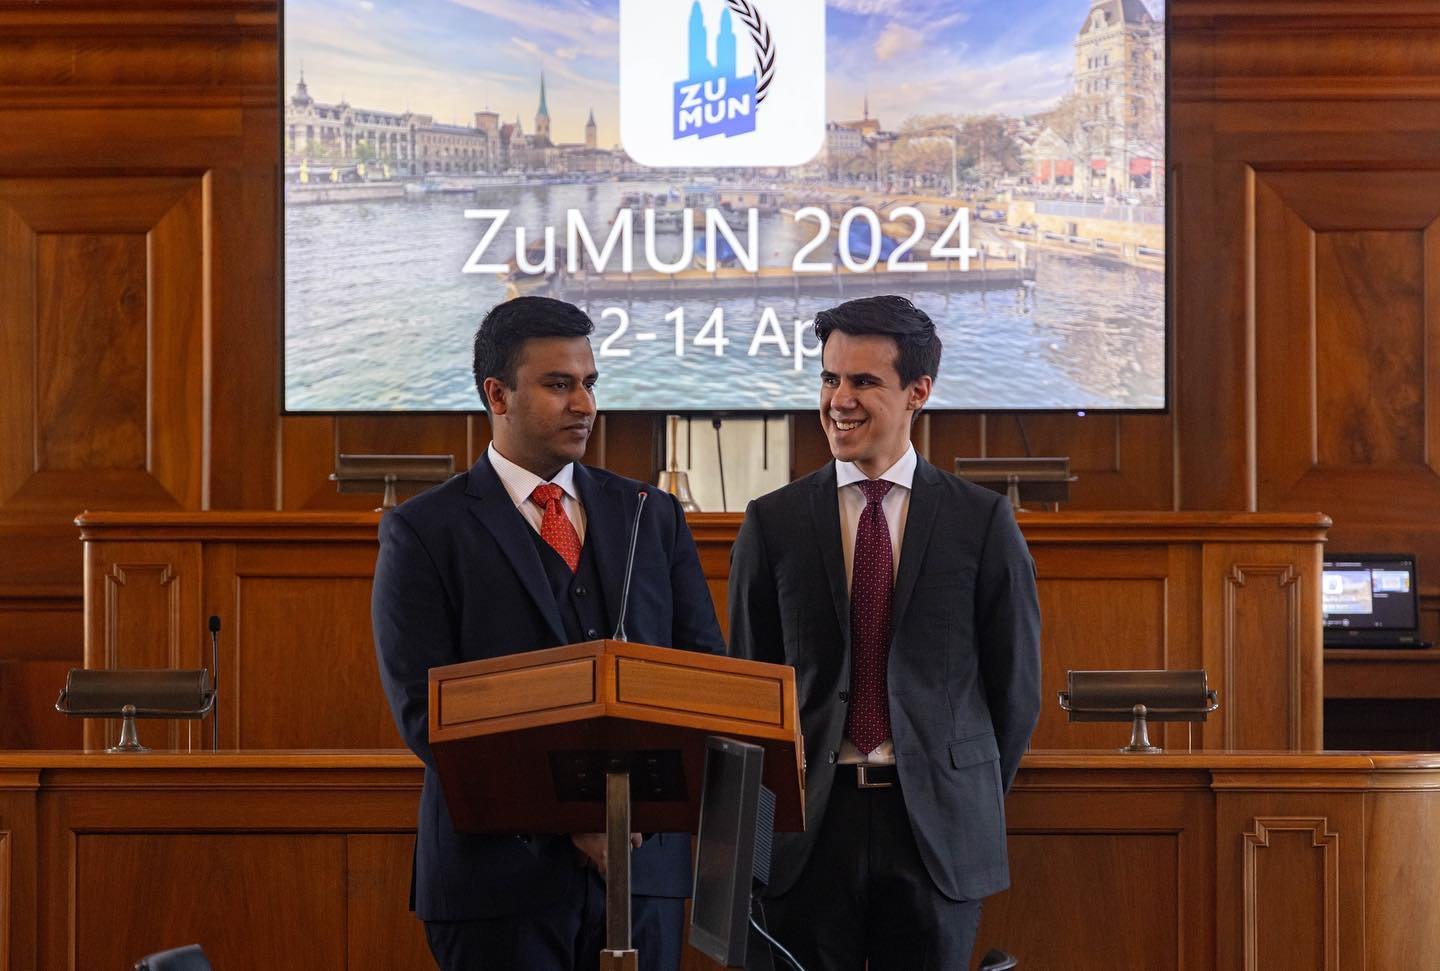 - ZuMUN 2024 Recap - 

This year&rsquo;s ZuMUN conference went by as quickly as it started. On Friday, April 12th, we welcomed delegates from all over the world. At the formal opening ceremony of the conference, they had the opportunity to meet caree